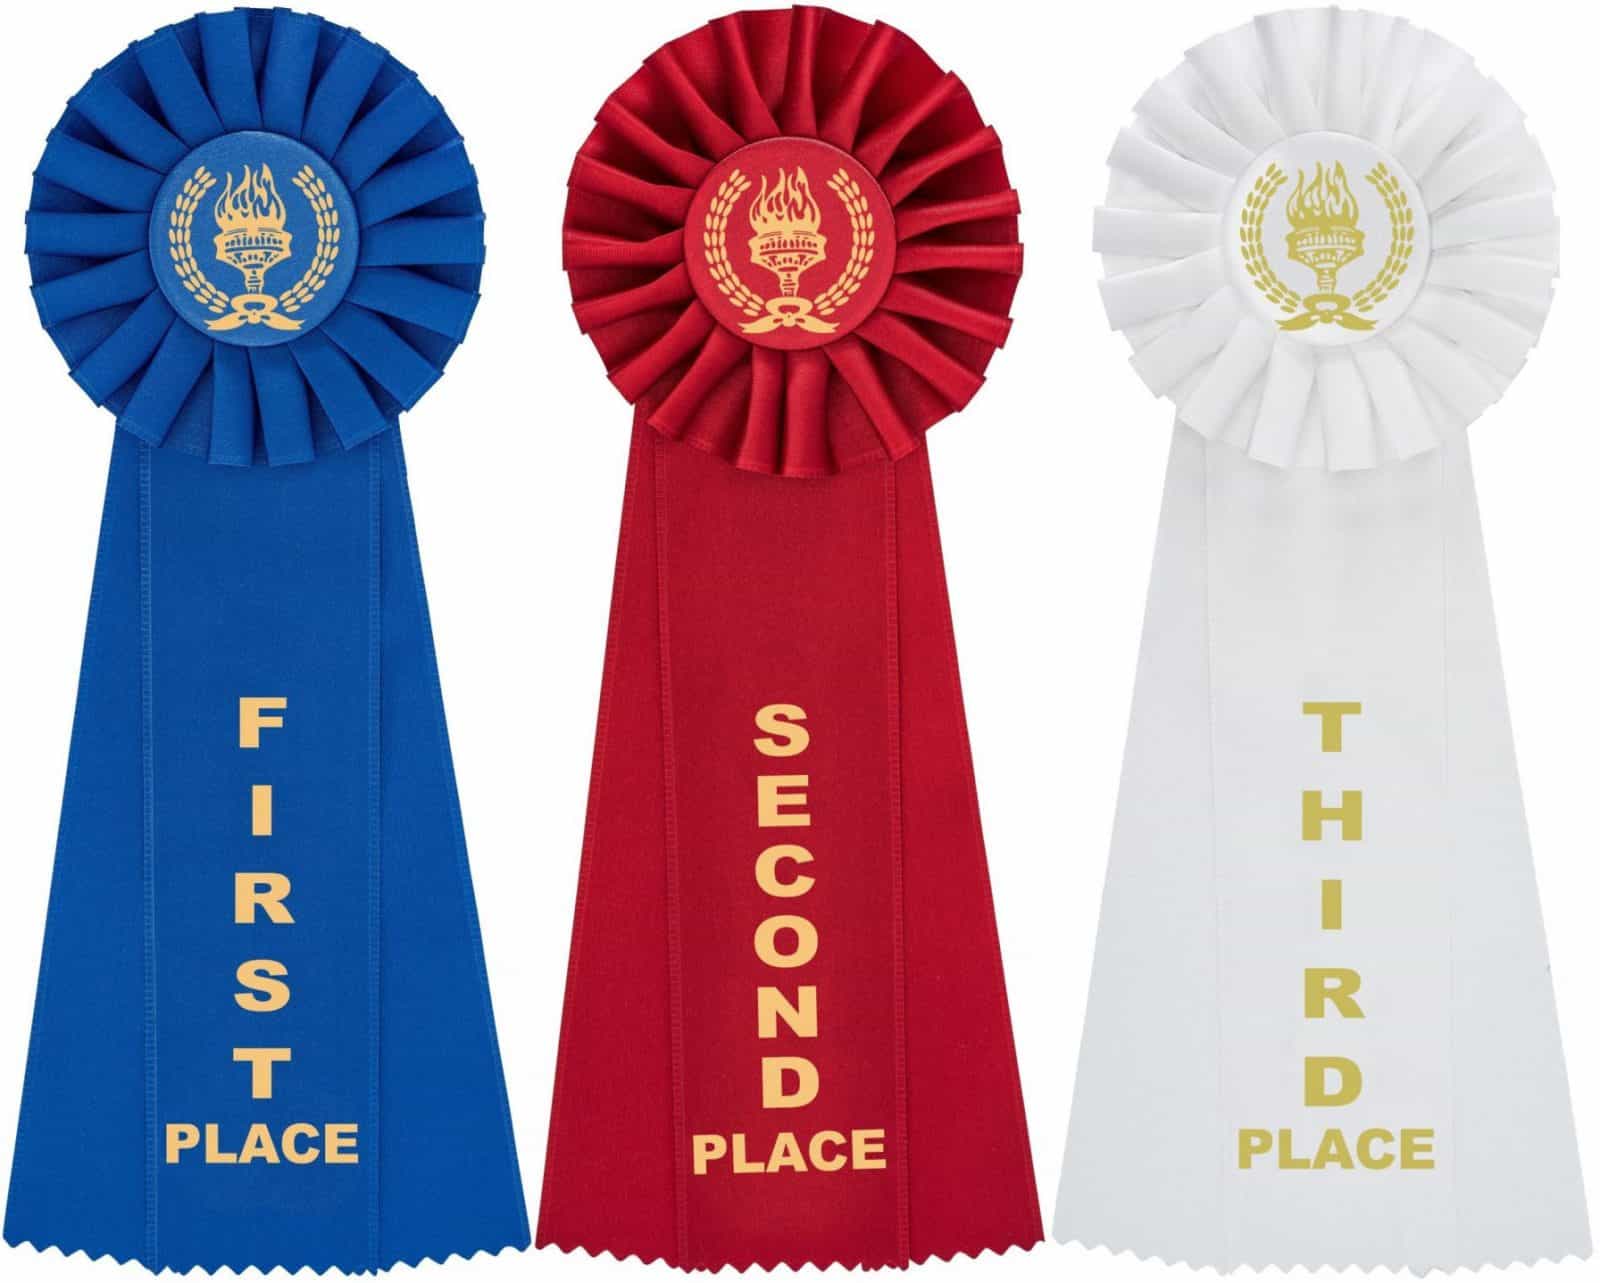 victory-award-rosette-place-ribbons-1-2-3-clinch-star